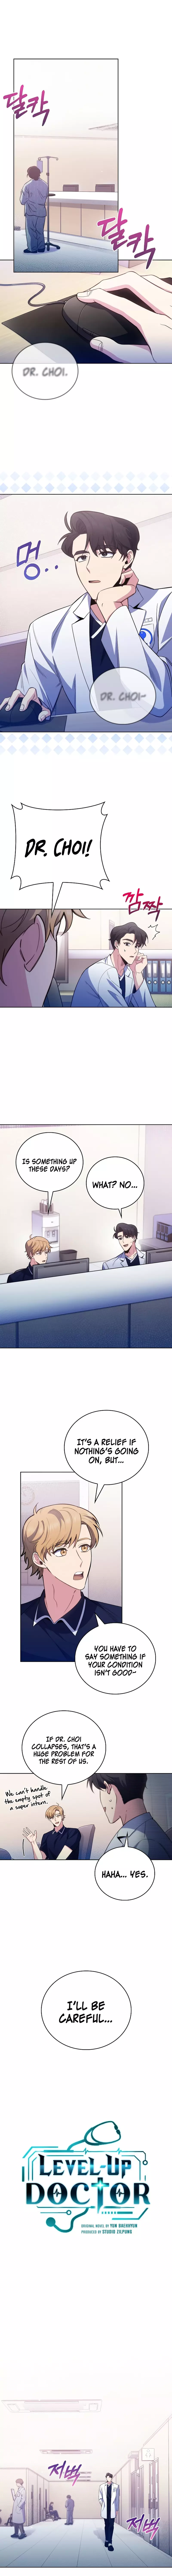 Level-Up Doctor (Manhwa) - 49 page 2-6696f3a4